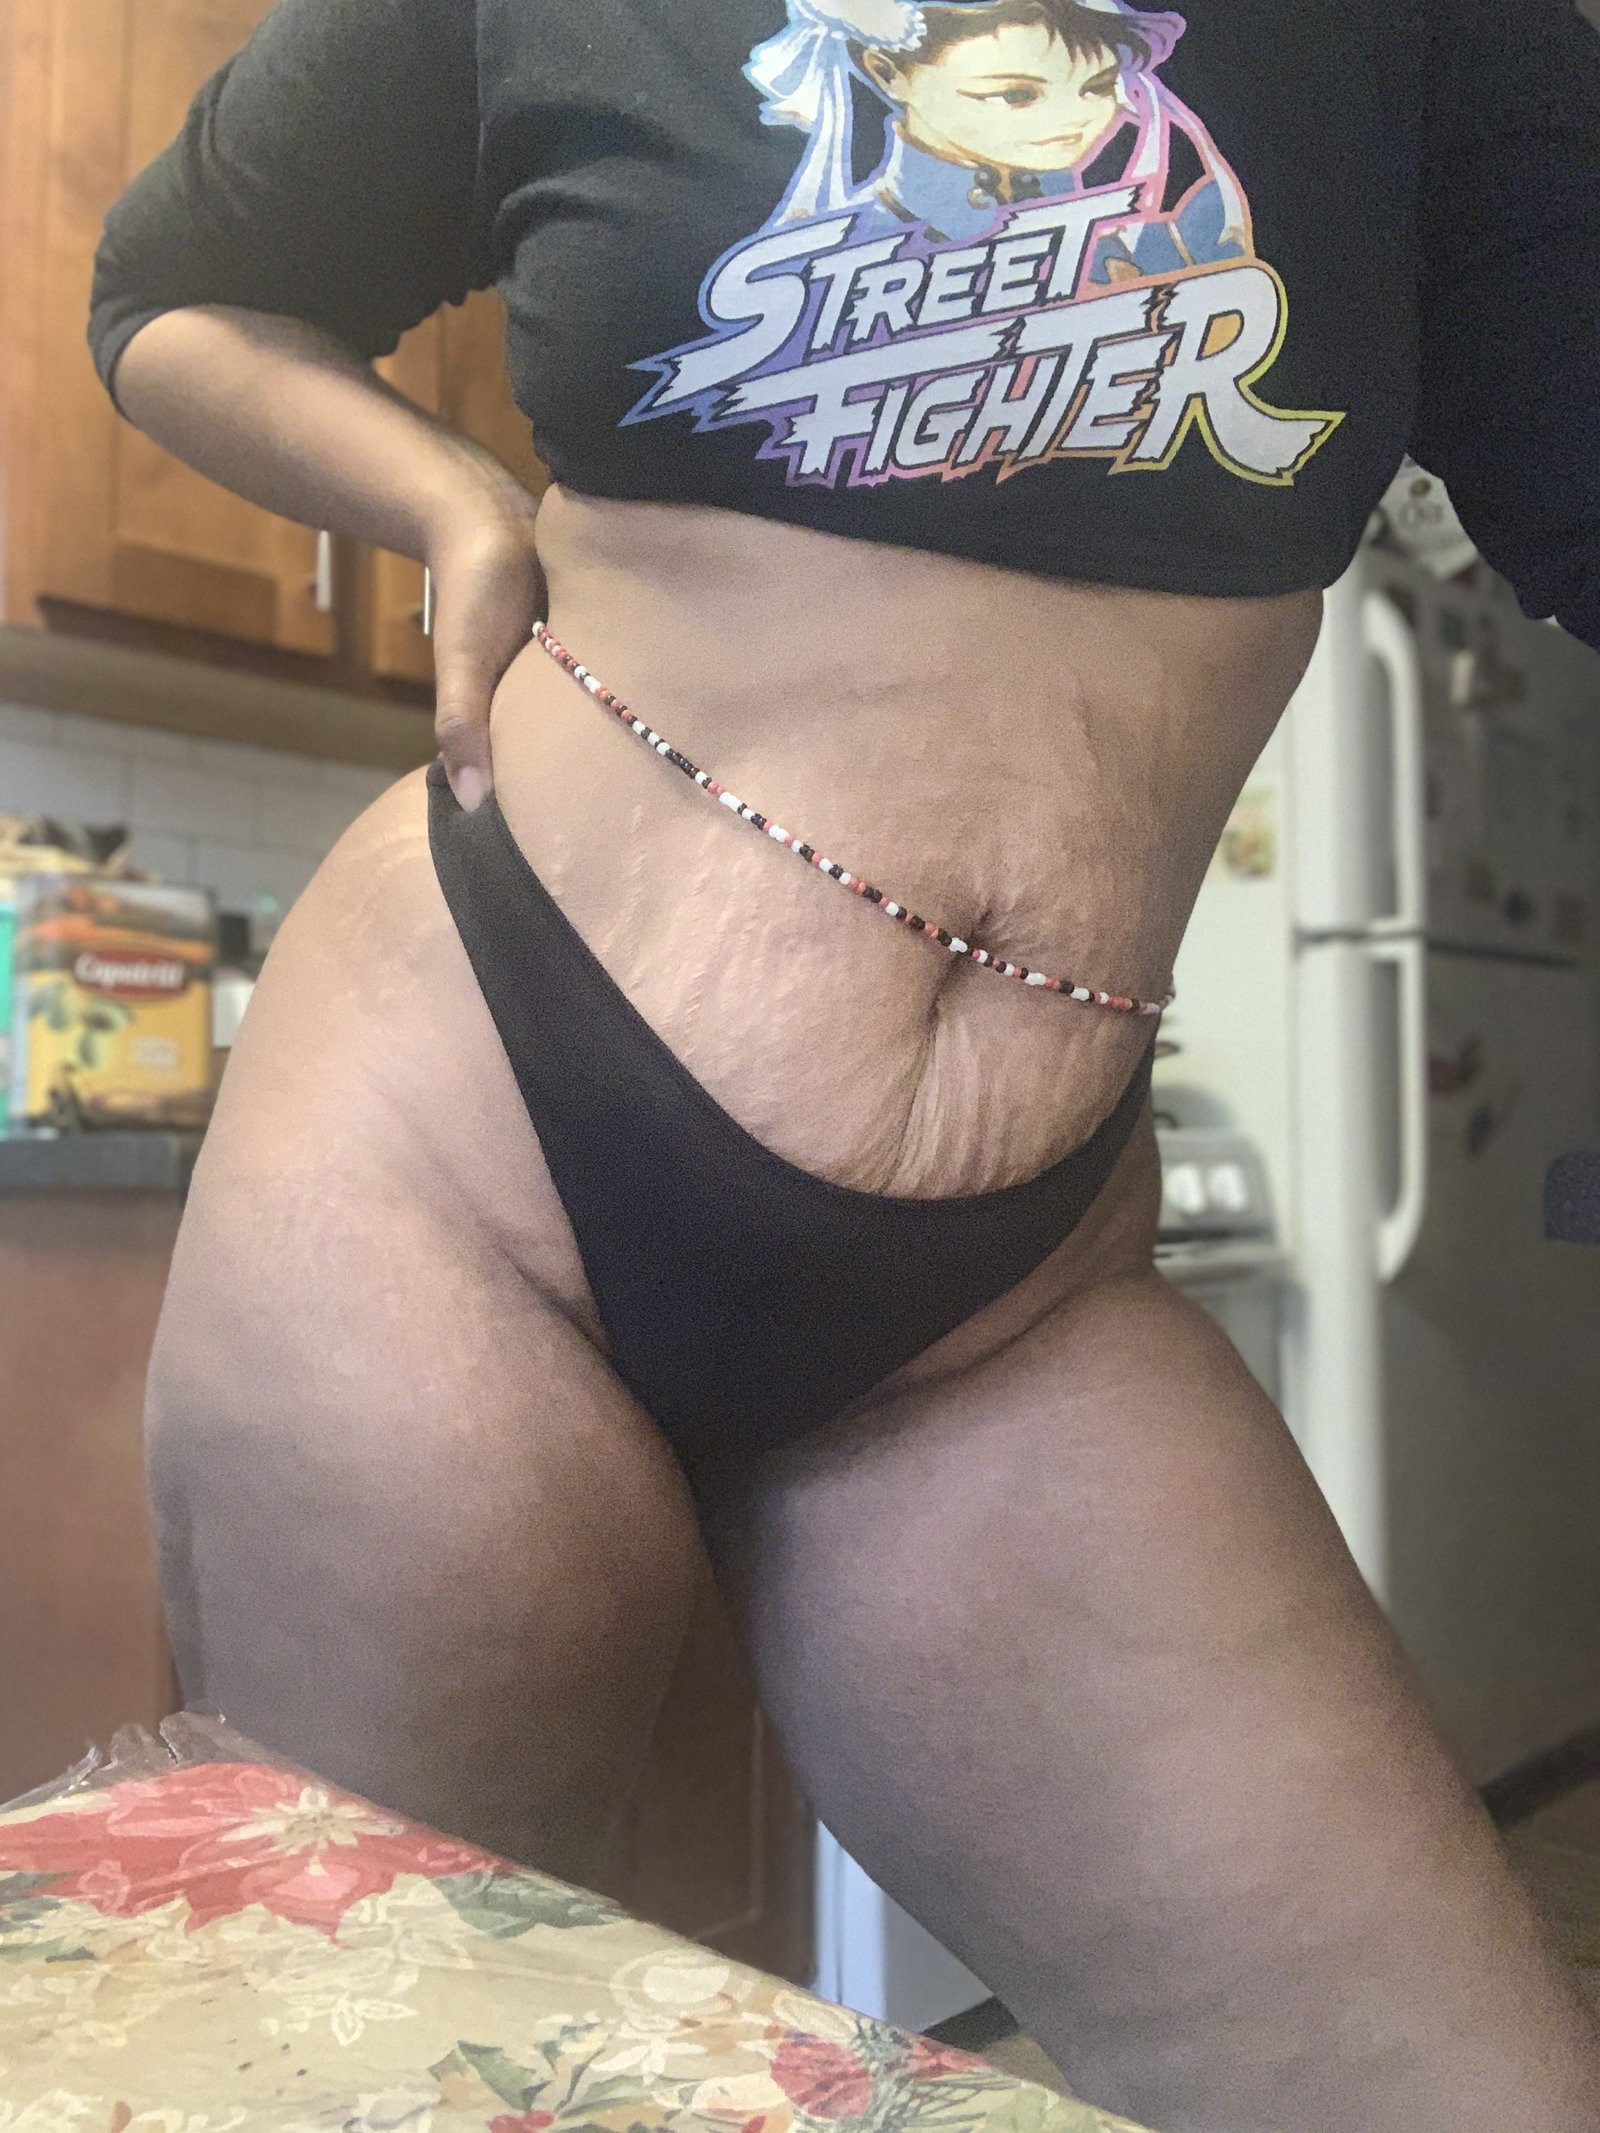 Photo by Jade baby with the username @findommegodjade, who is a star user,  April 28, 2020 at 12:30 AM. The post is about the topic MILF and the text says 'Ive heard Thick Thigh Savea Lives🧐
can I save yours 😘'